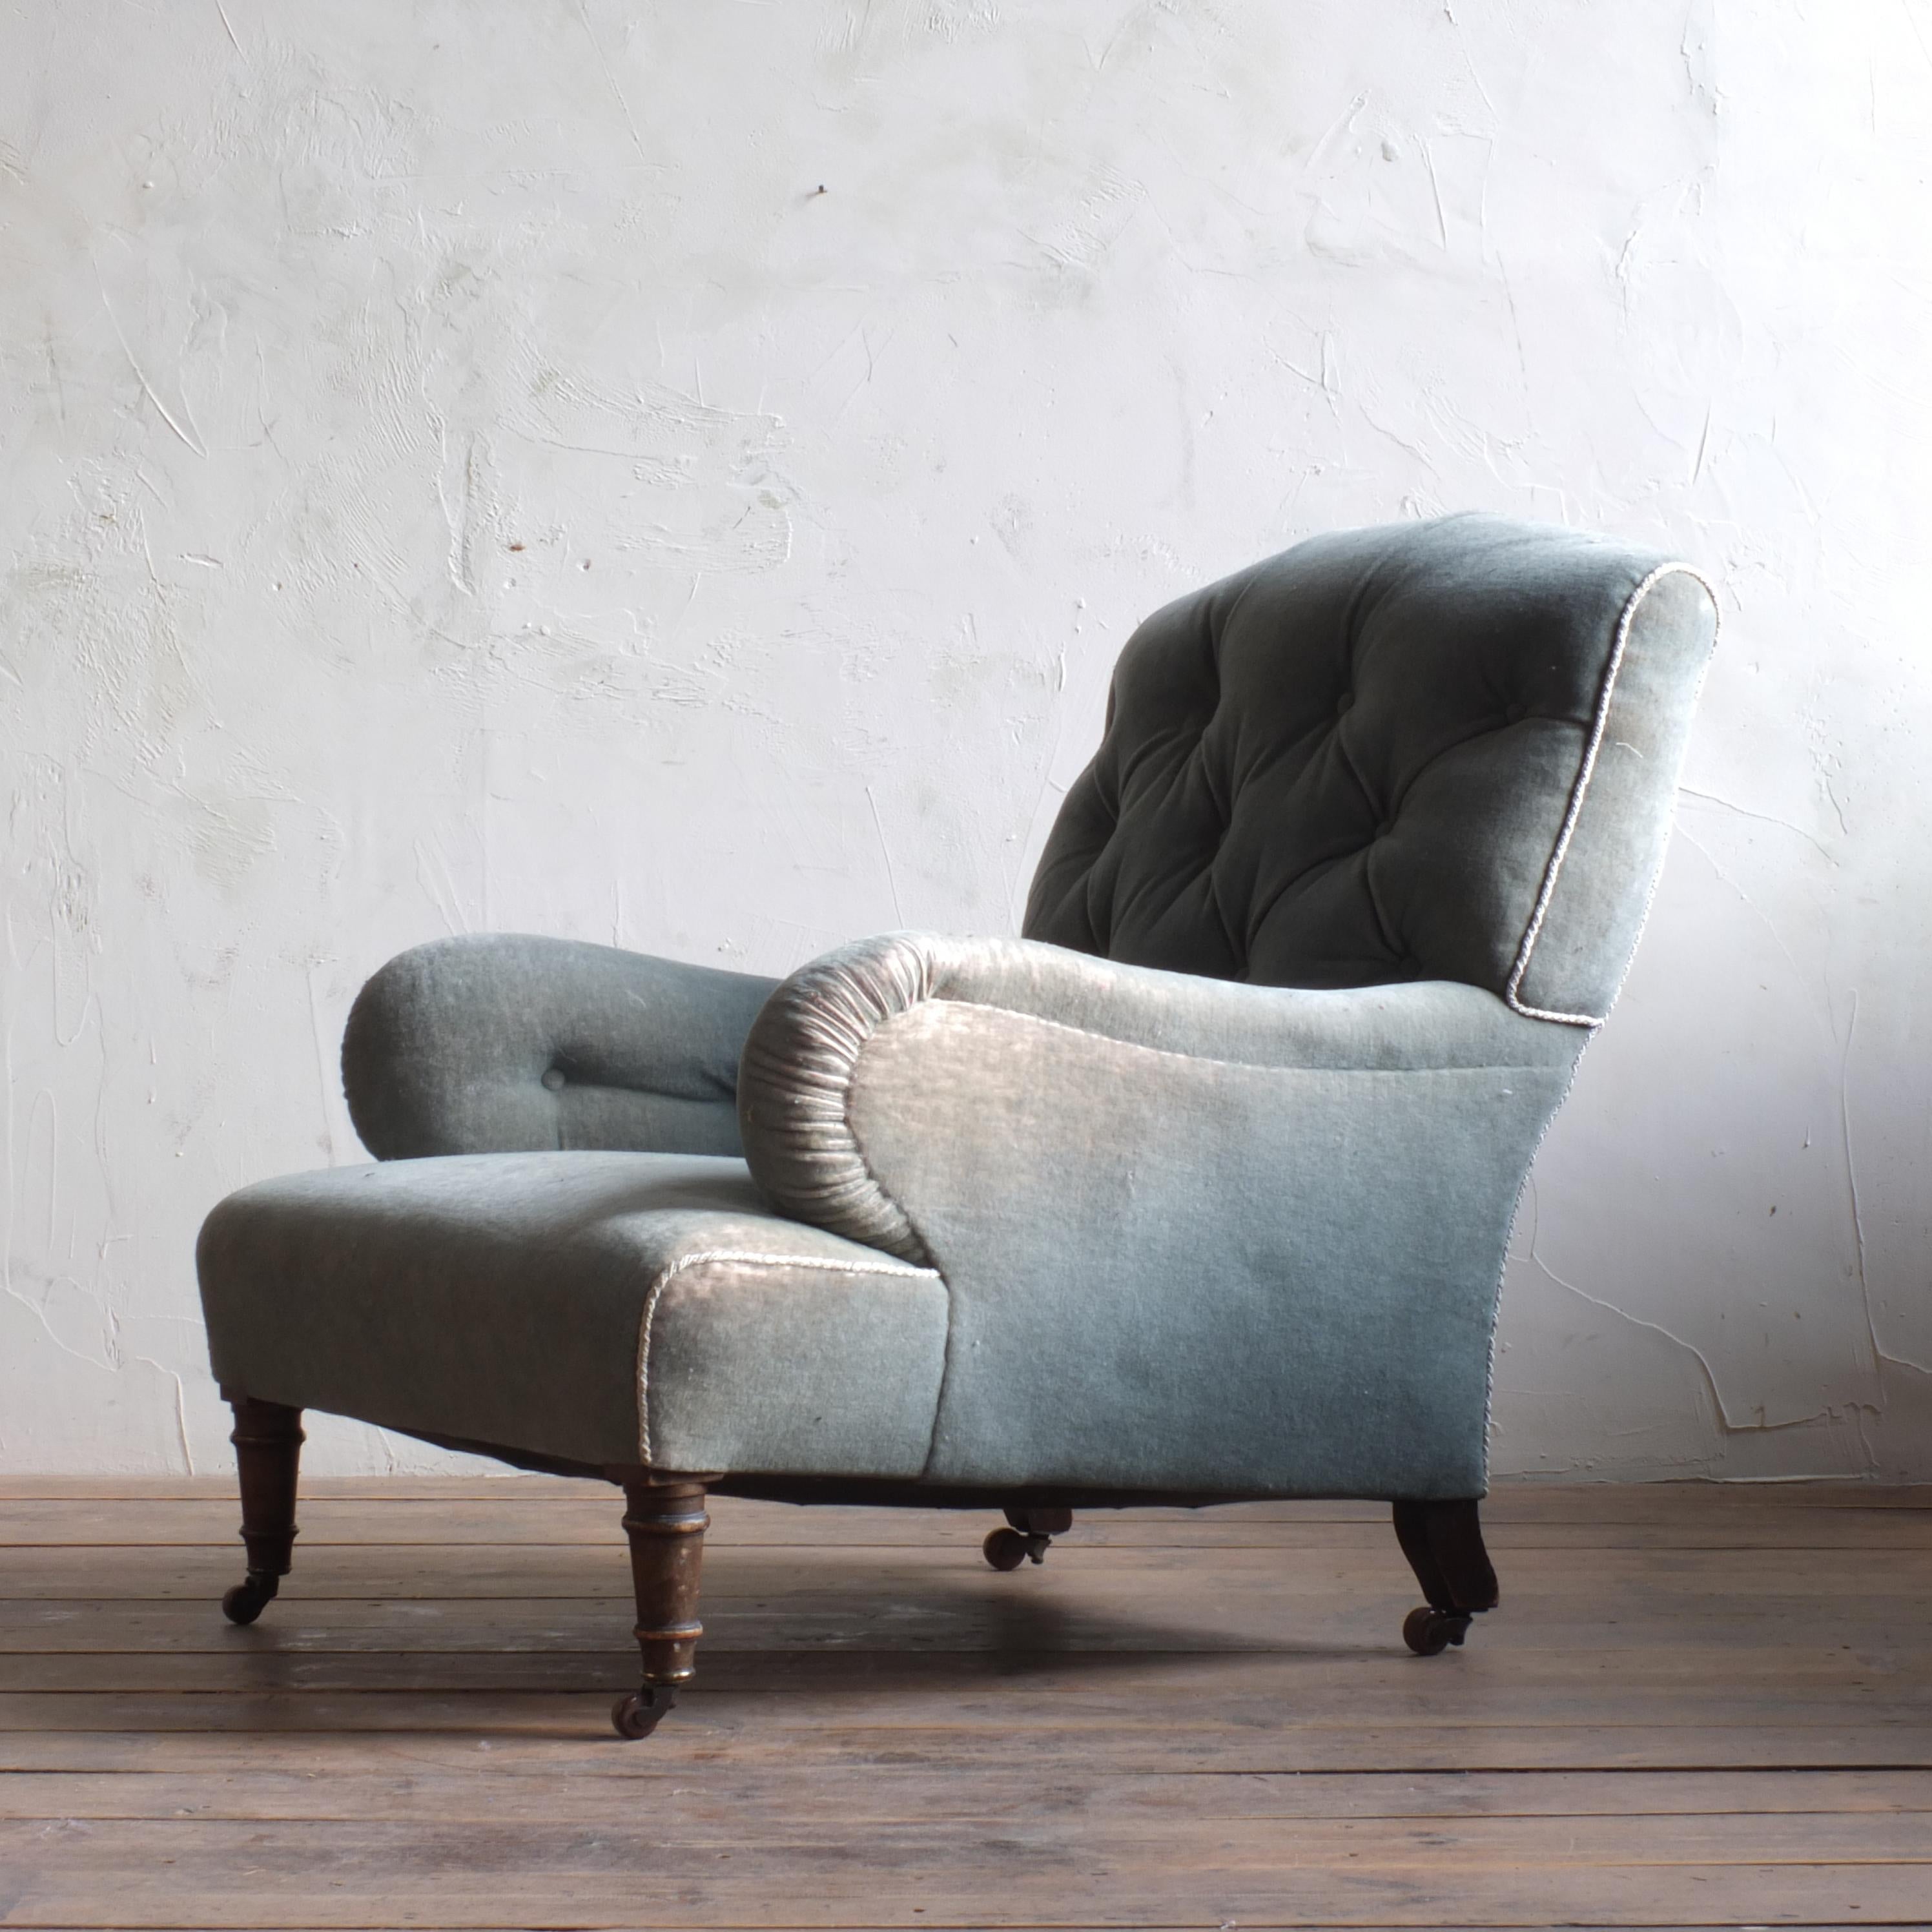 A large deep seated country house armchair in the manner of Howard and sons. Currently upholstered in pale blue velvet that is thread bare in places. The chair is advertised as in need of upholstery however is more than liveable and very